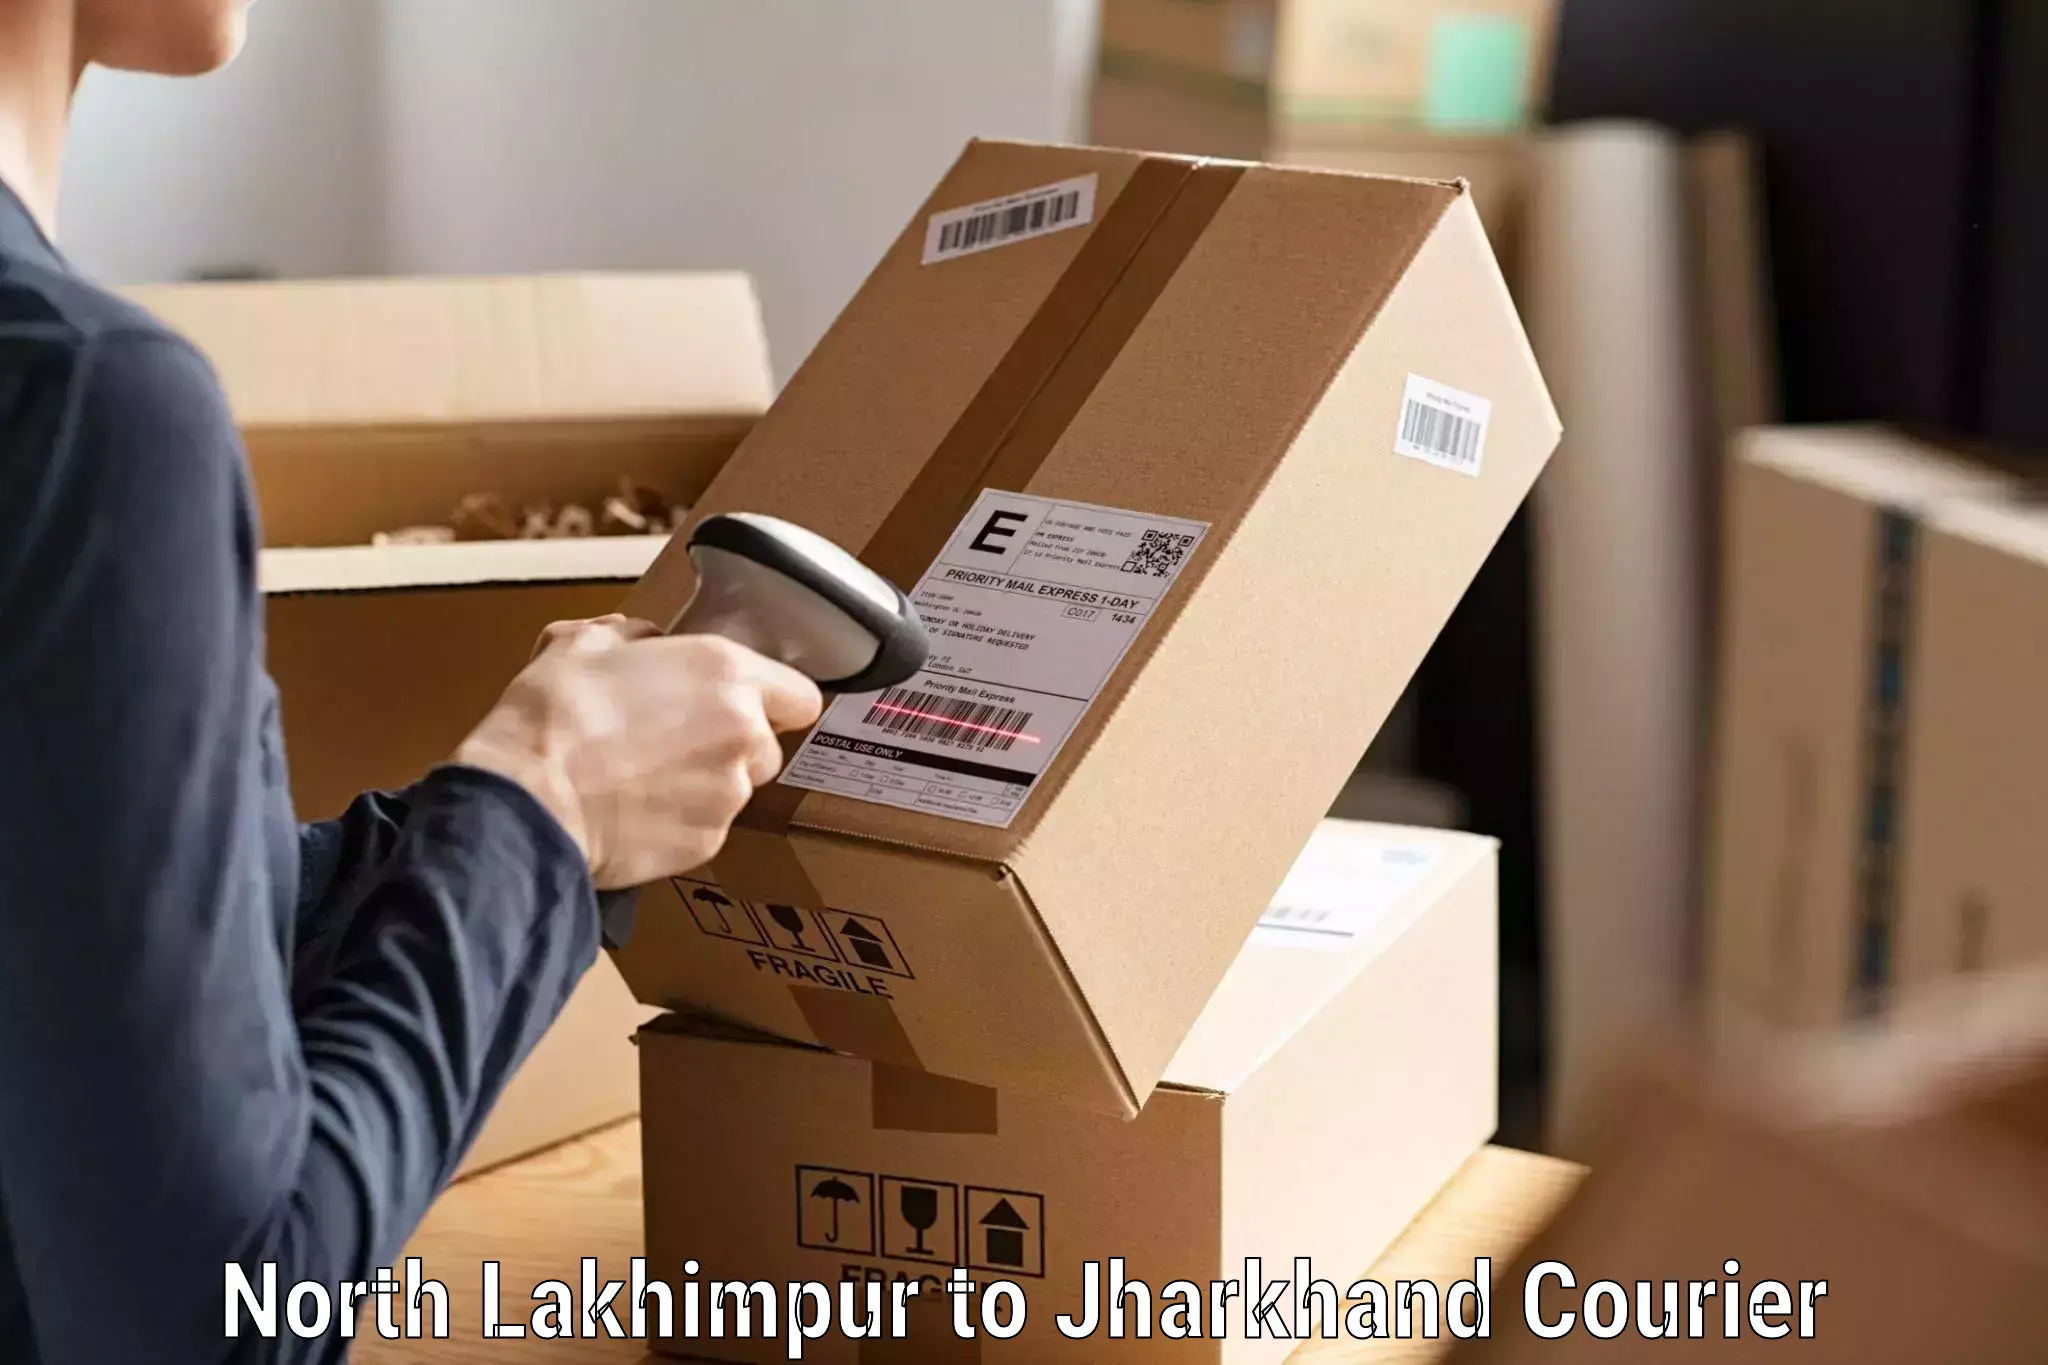 User-friendly courier app North Lakhimpur to Dhanbad